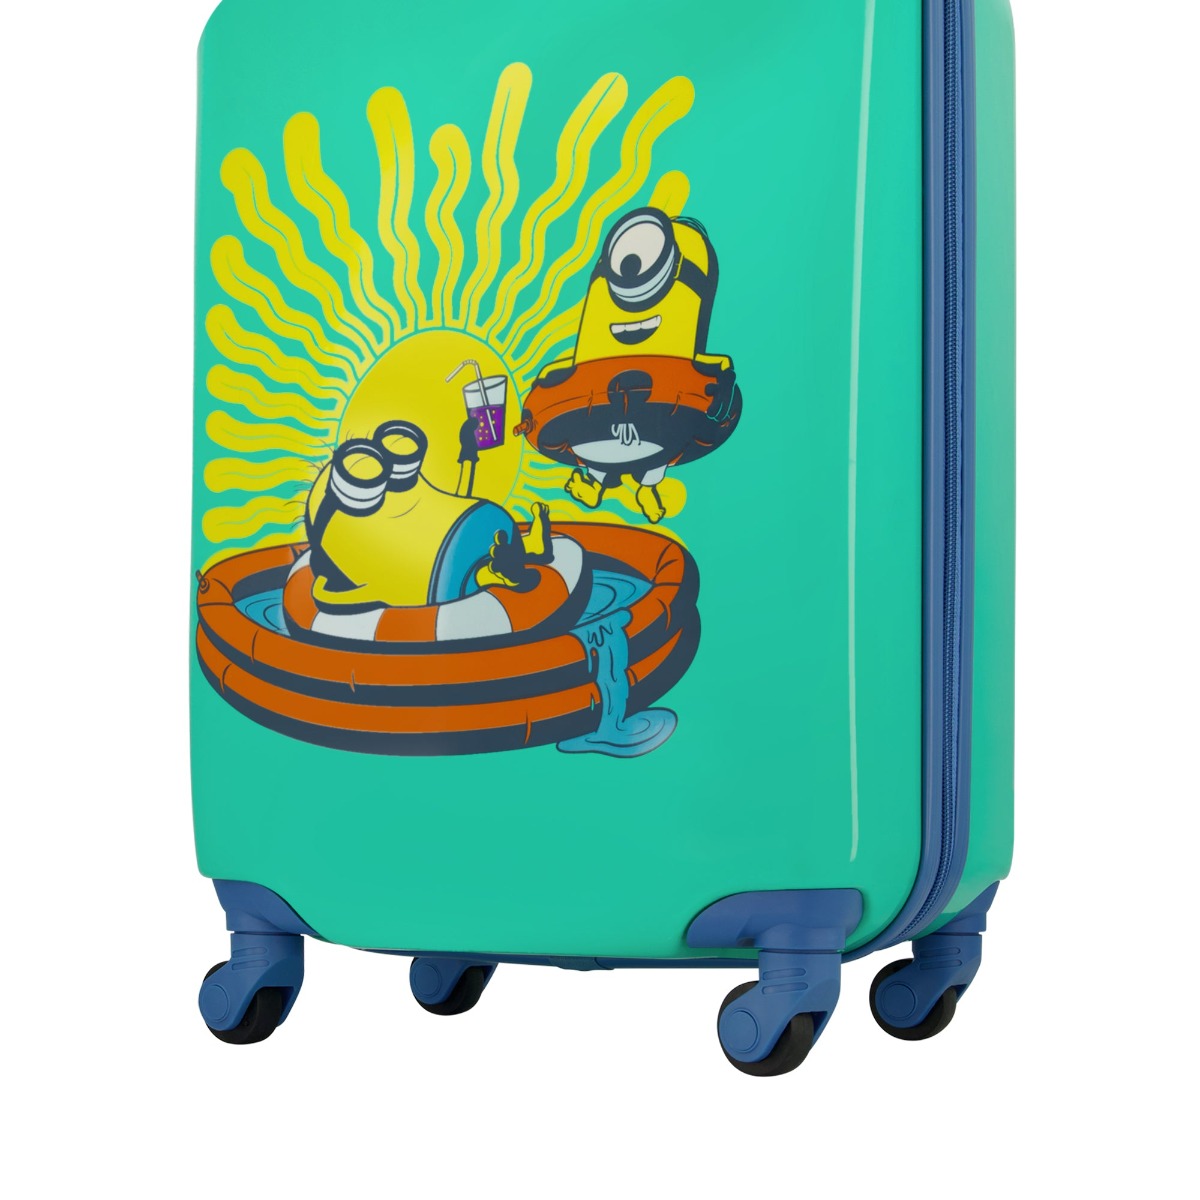 Ful Minions Vacation 21" luggage - best hardshell carry-on suitcase for kids